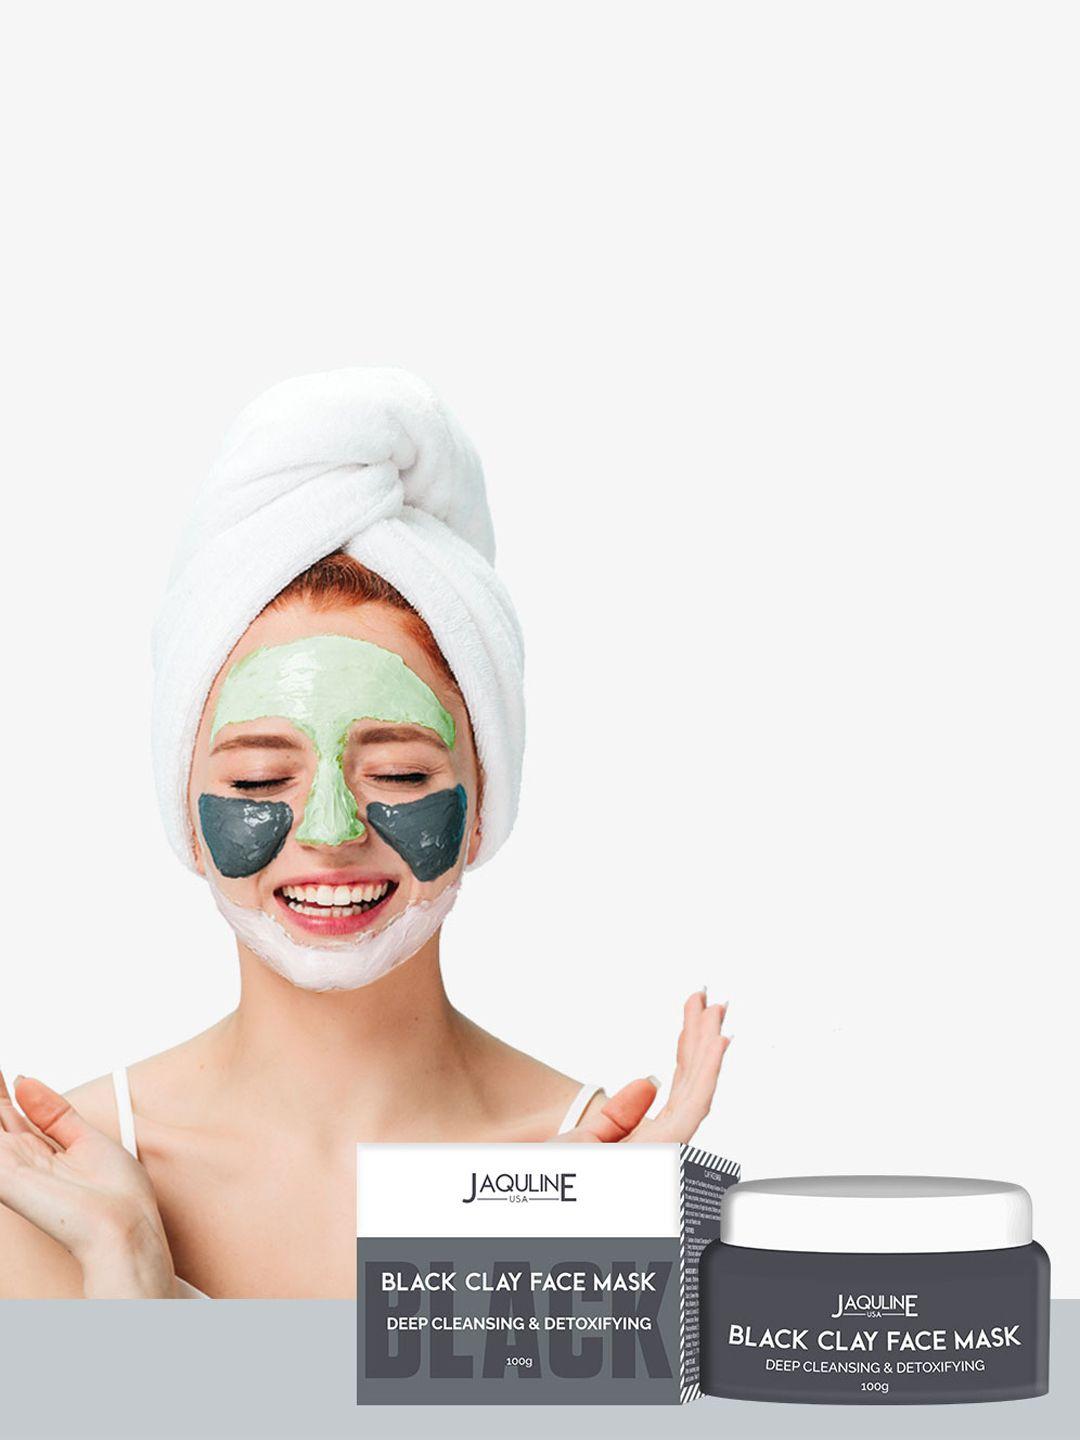 jaquline usa black clay deep cleansing & detoxifying face mask - 100 gm